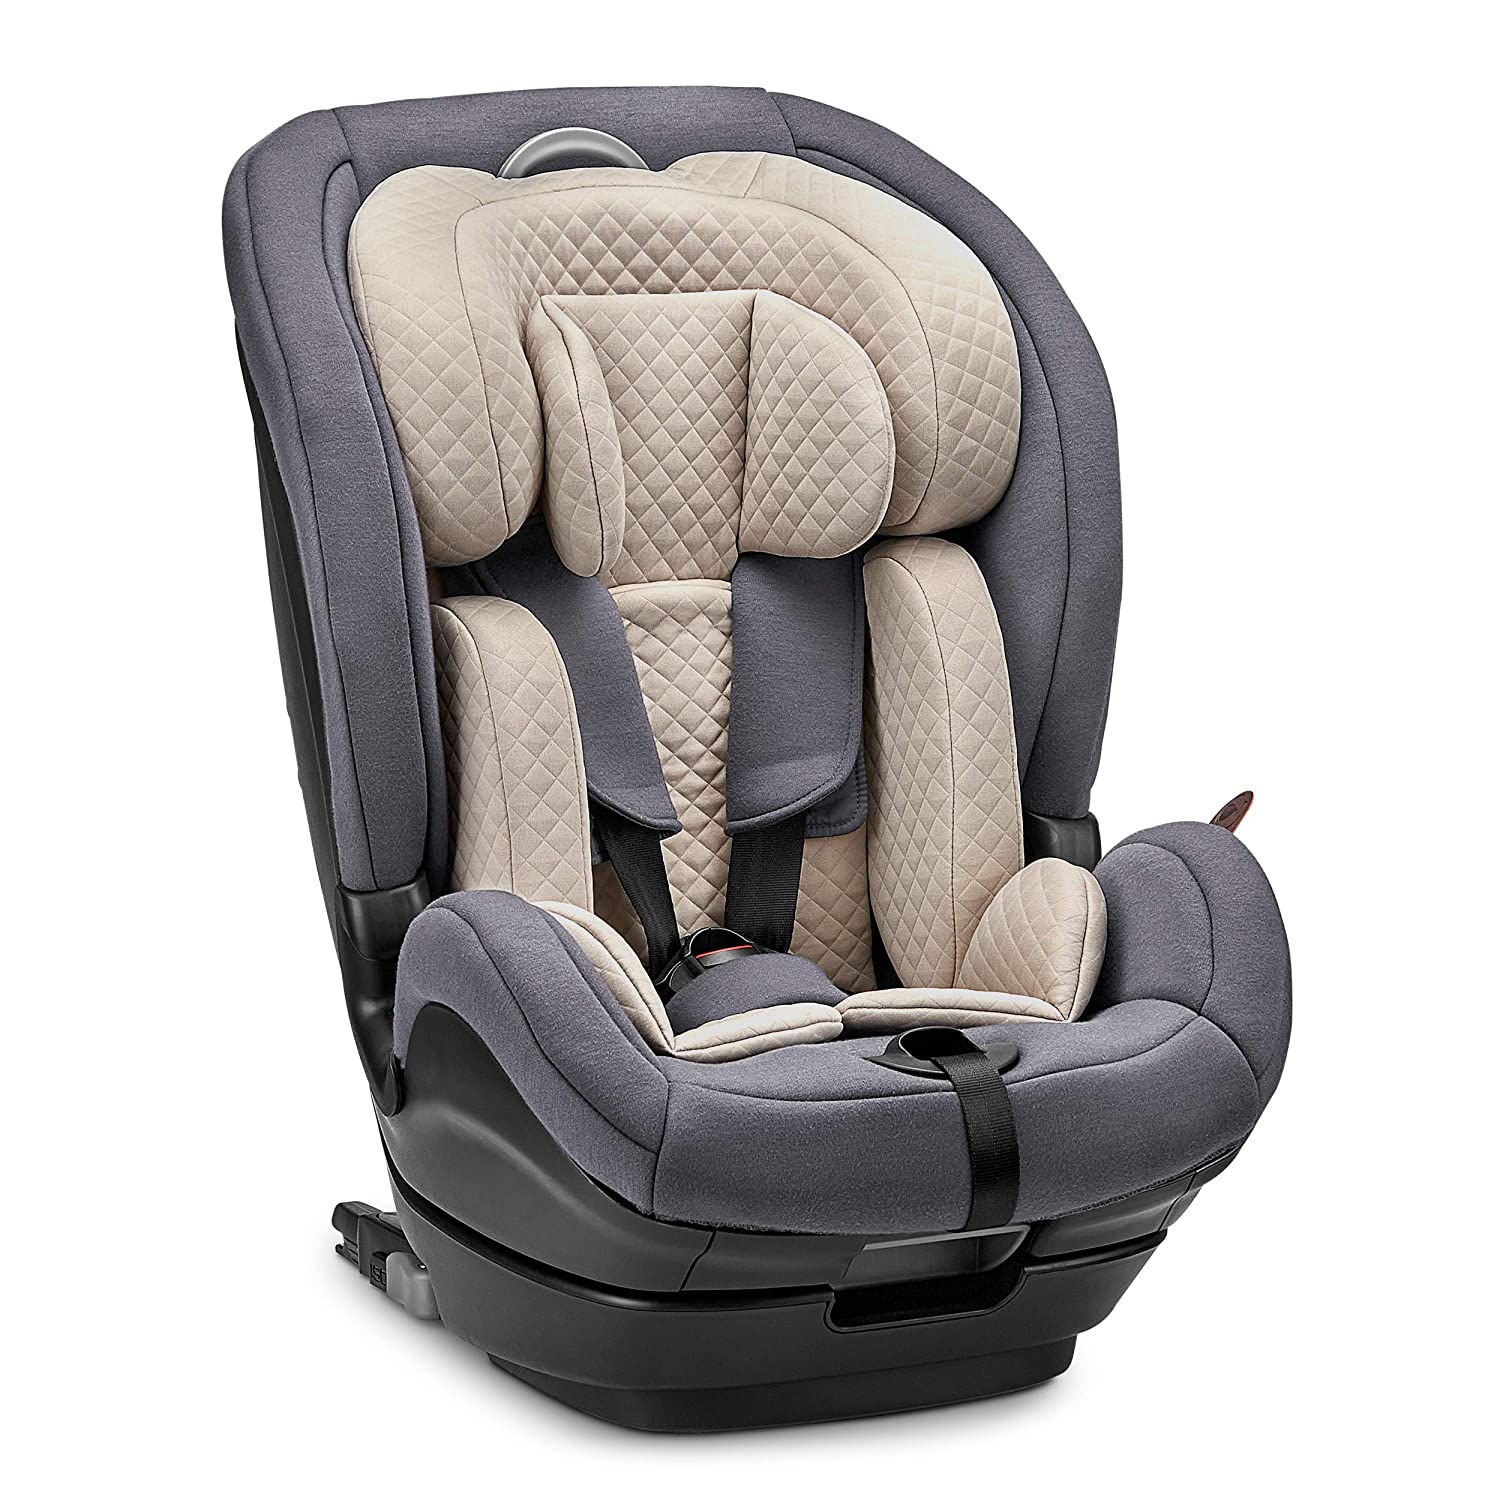 ABC Design Aspen i-Size Diamond Edition Child Car Seat for Children 76-150 cm (from 15 months - 12 years) Isofix Attachment Secure Side Impact Protection Colour: Stone